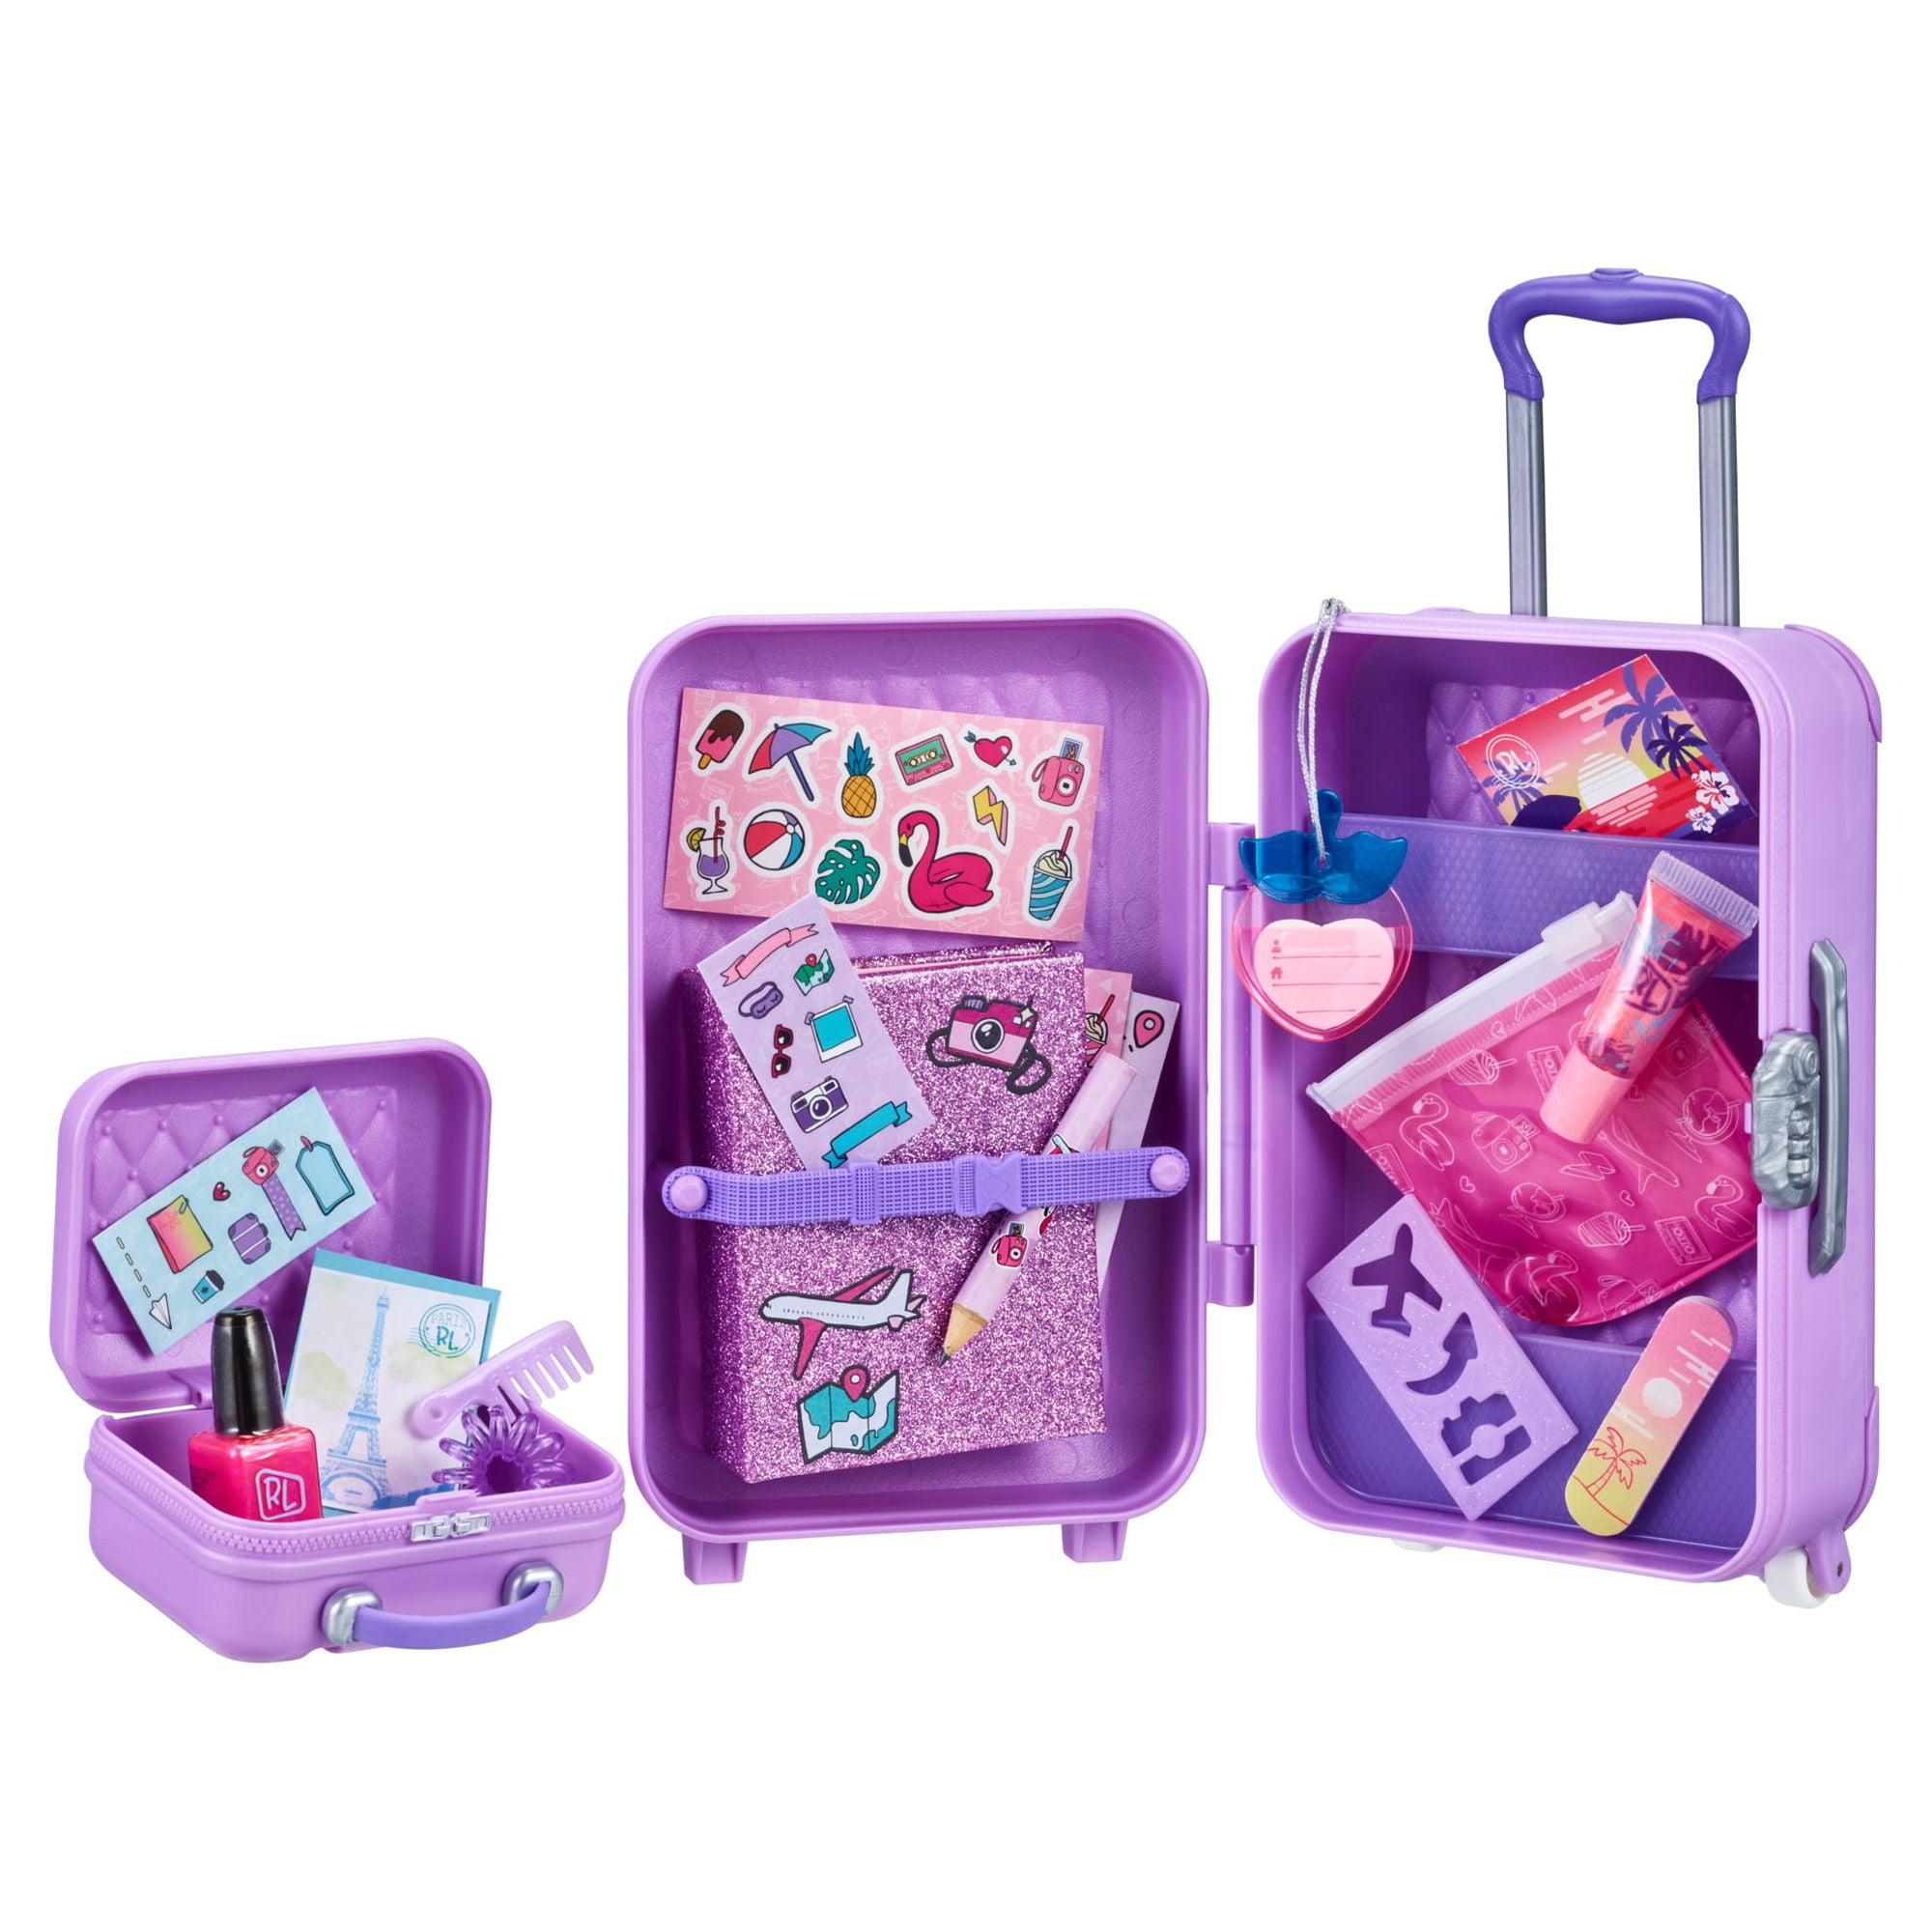 REAL LITTLES My Rainbow Collection, Roller Case, Fridge and Locker Desk  Caddies in One Pack! Plus 57…See more REAL LITTLES My Rainbow Collection